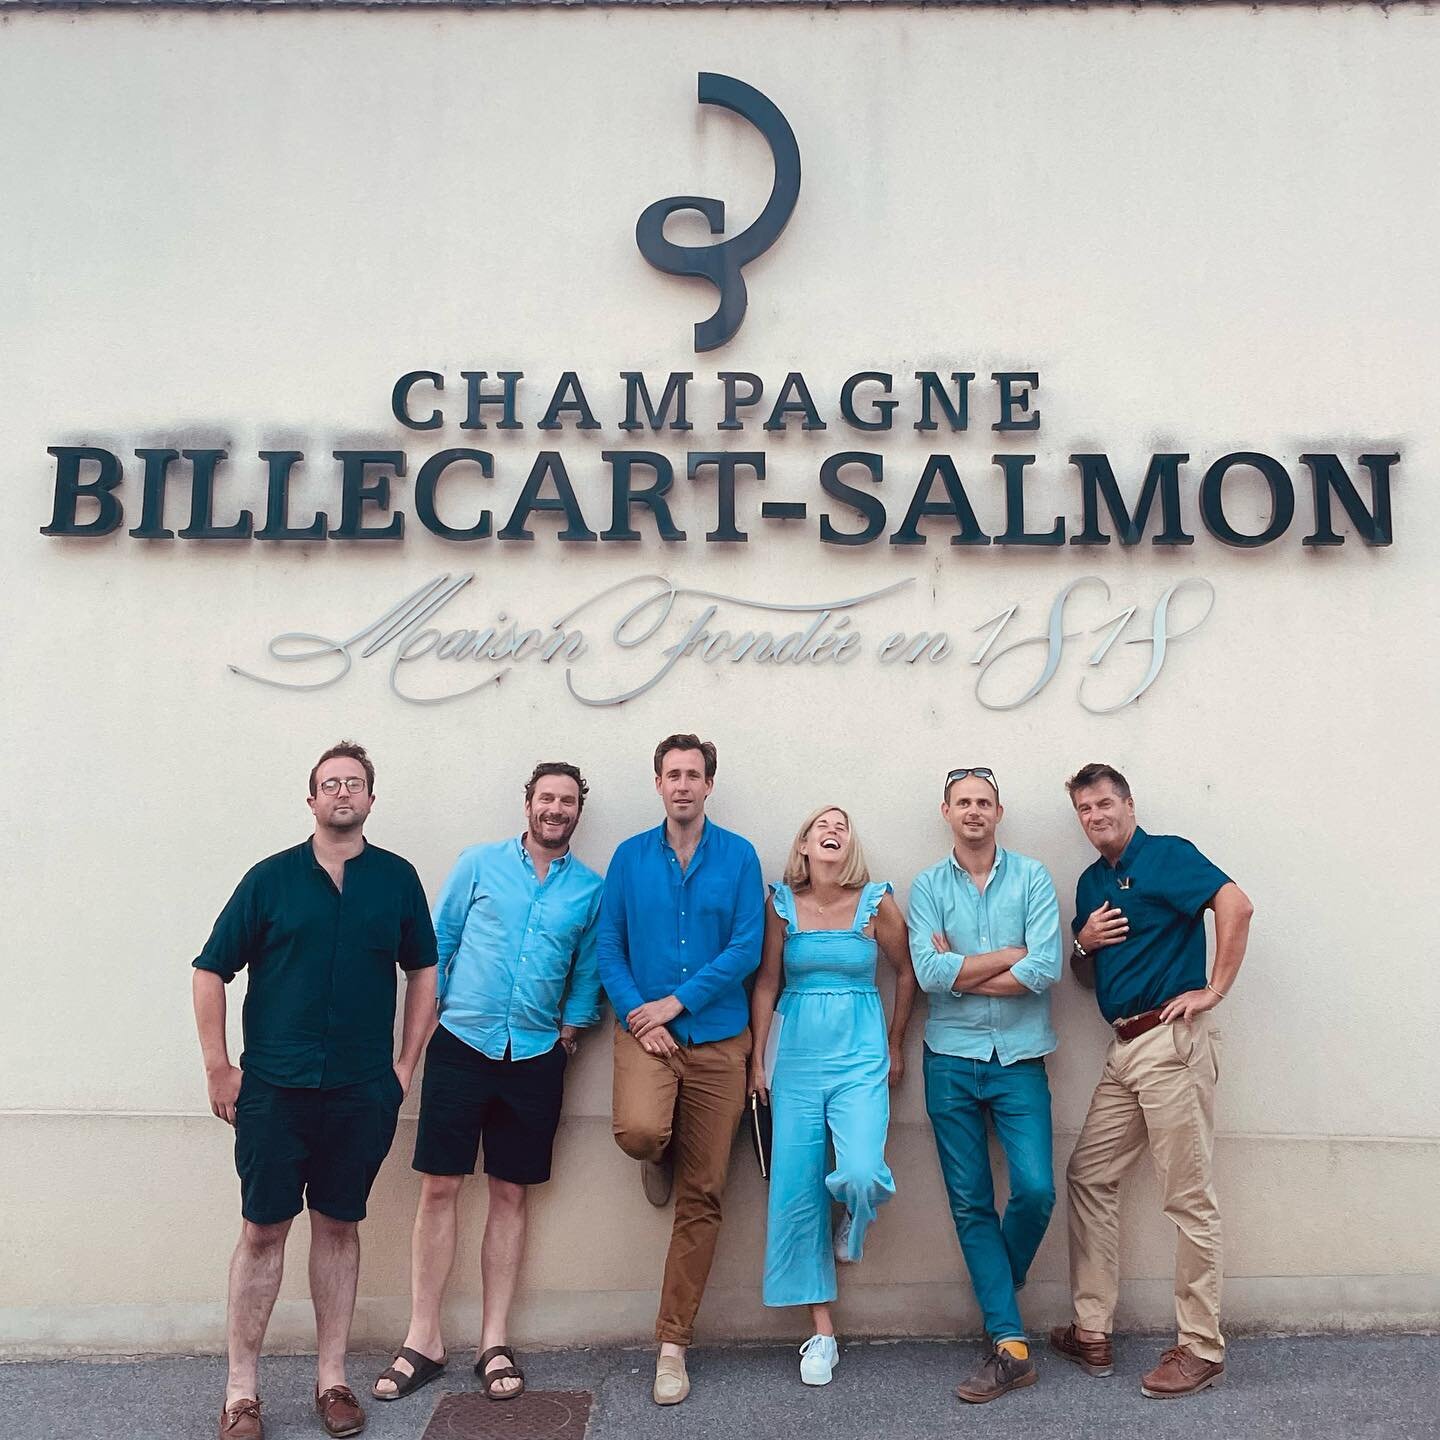 Thank you so much @mrbillecart such an honour to have time with you @champagne_billecart_salmon and to @wanderlustwine (wine squad) M